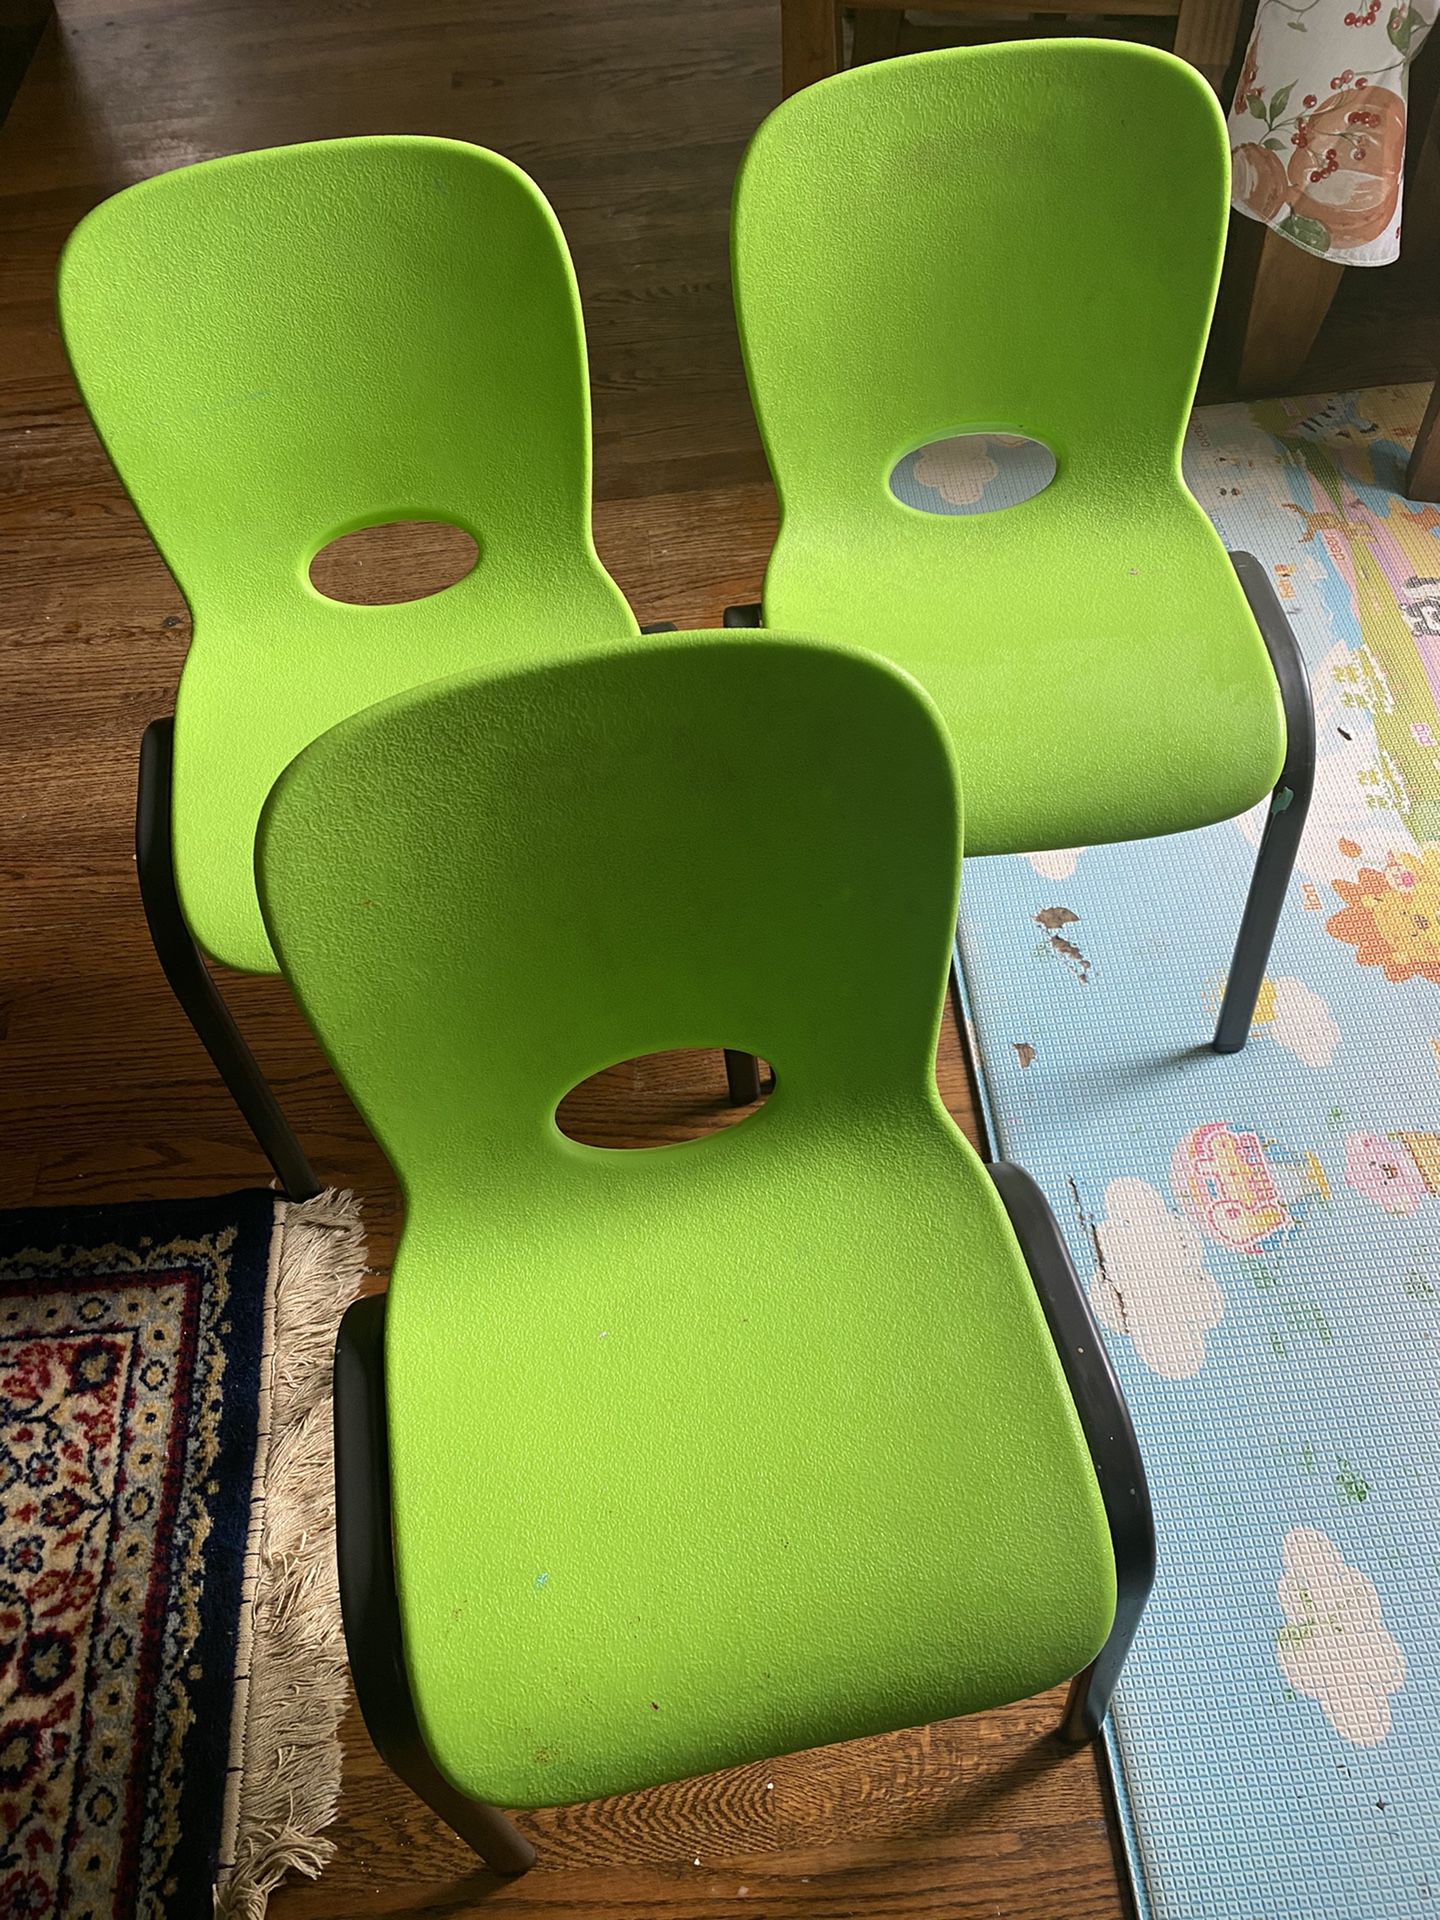 3 Classroom chair for kids